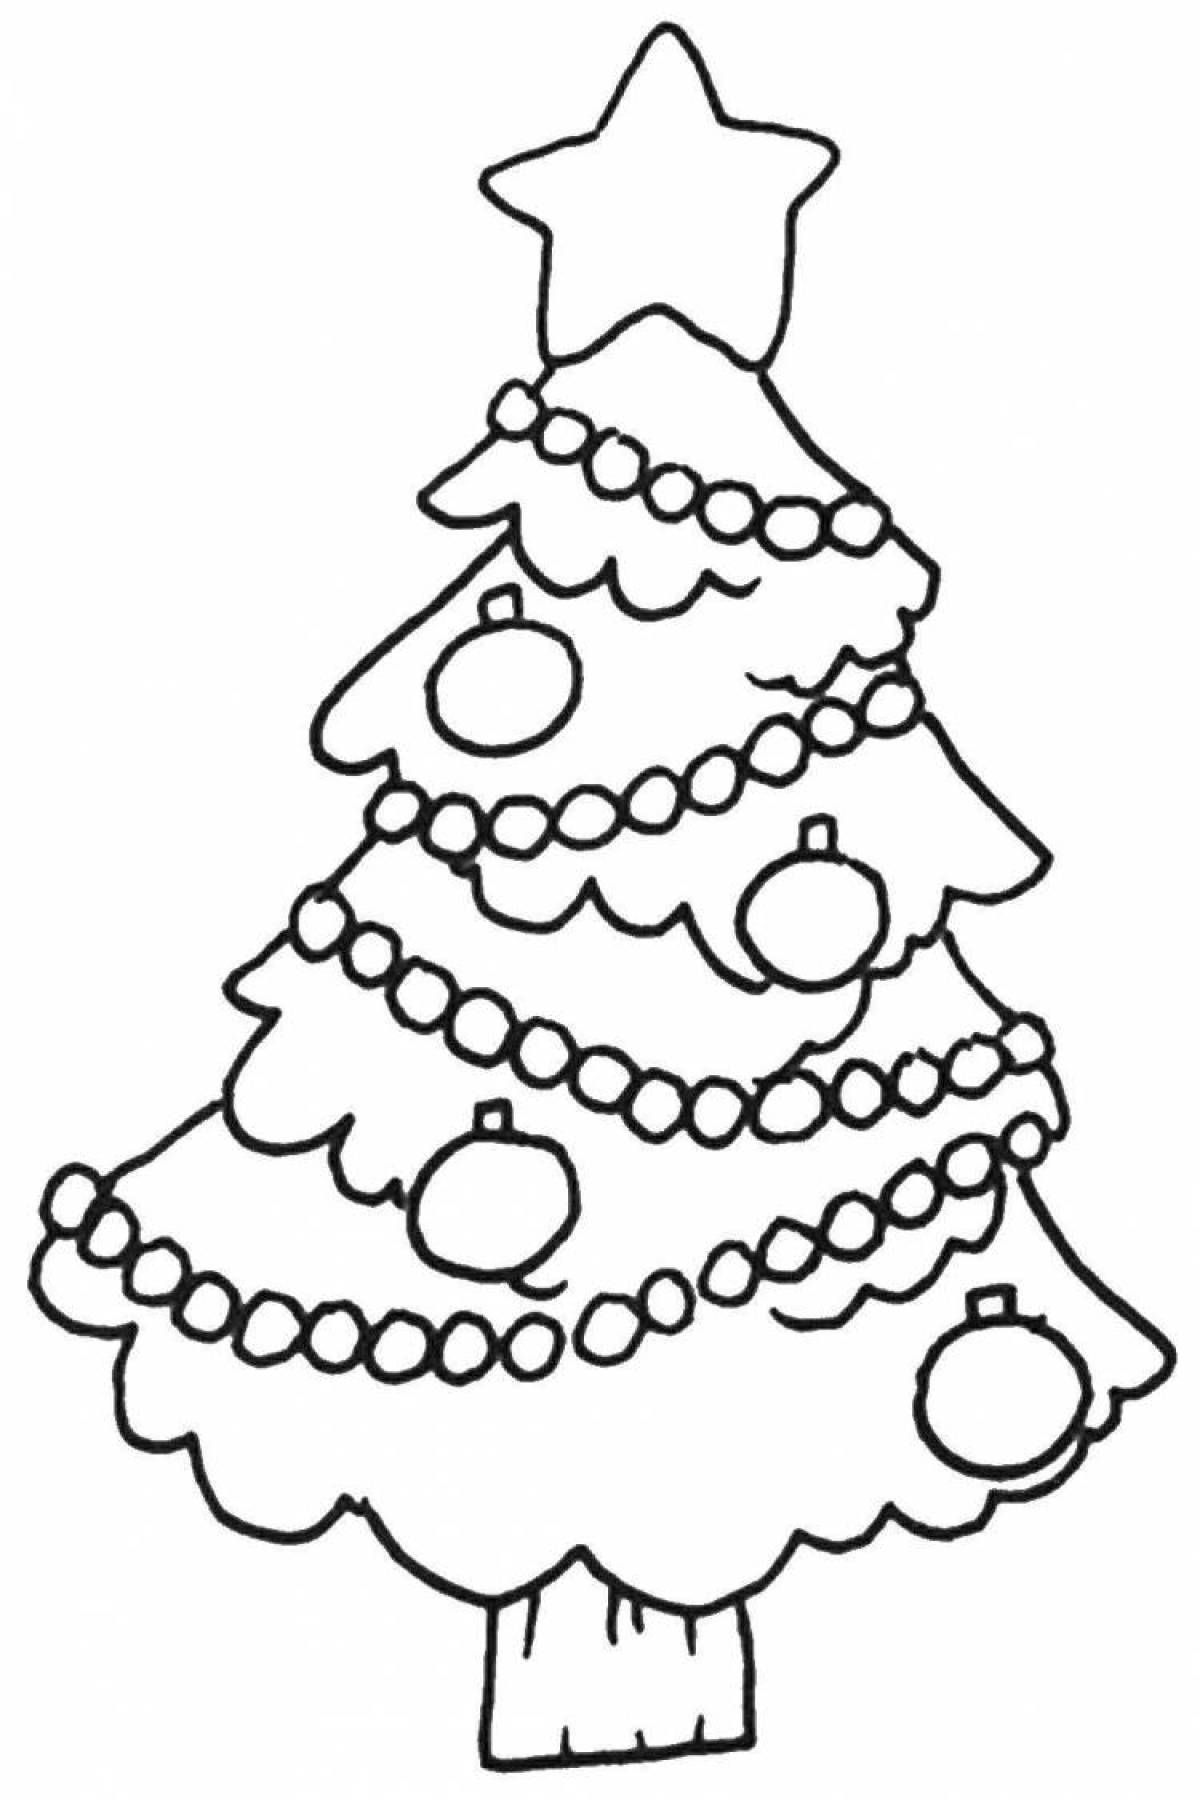 Exquisite Christmas tree coloring book for 2-3 year olds